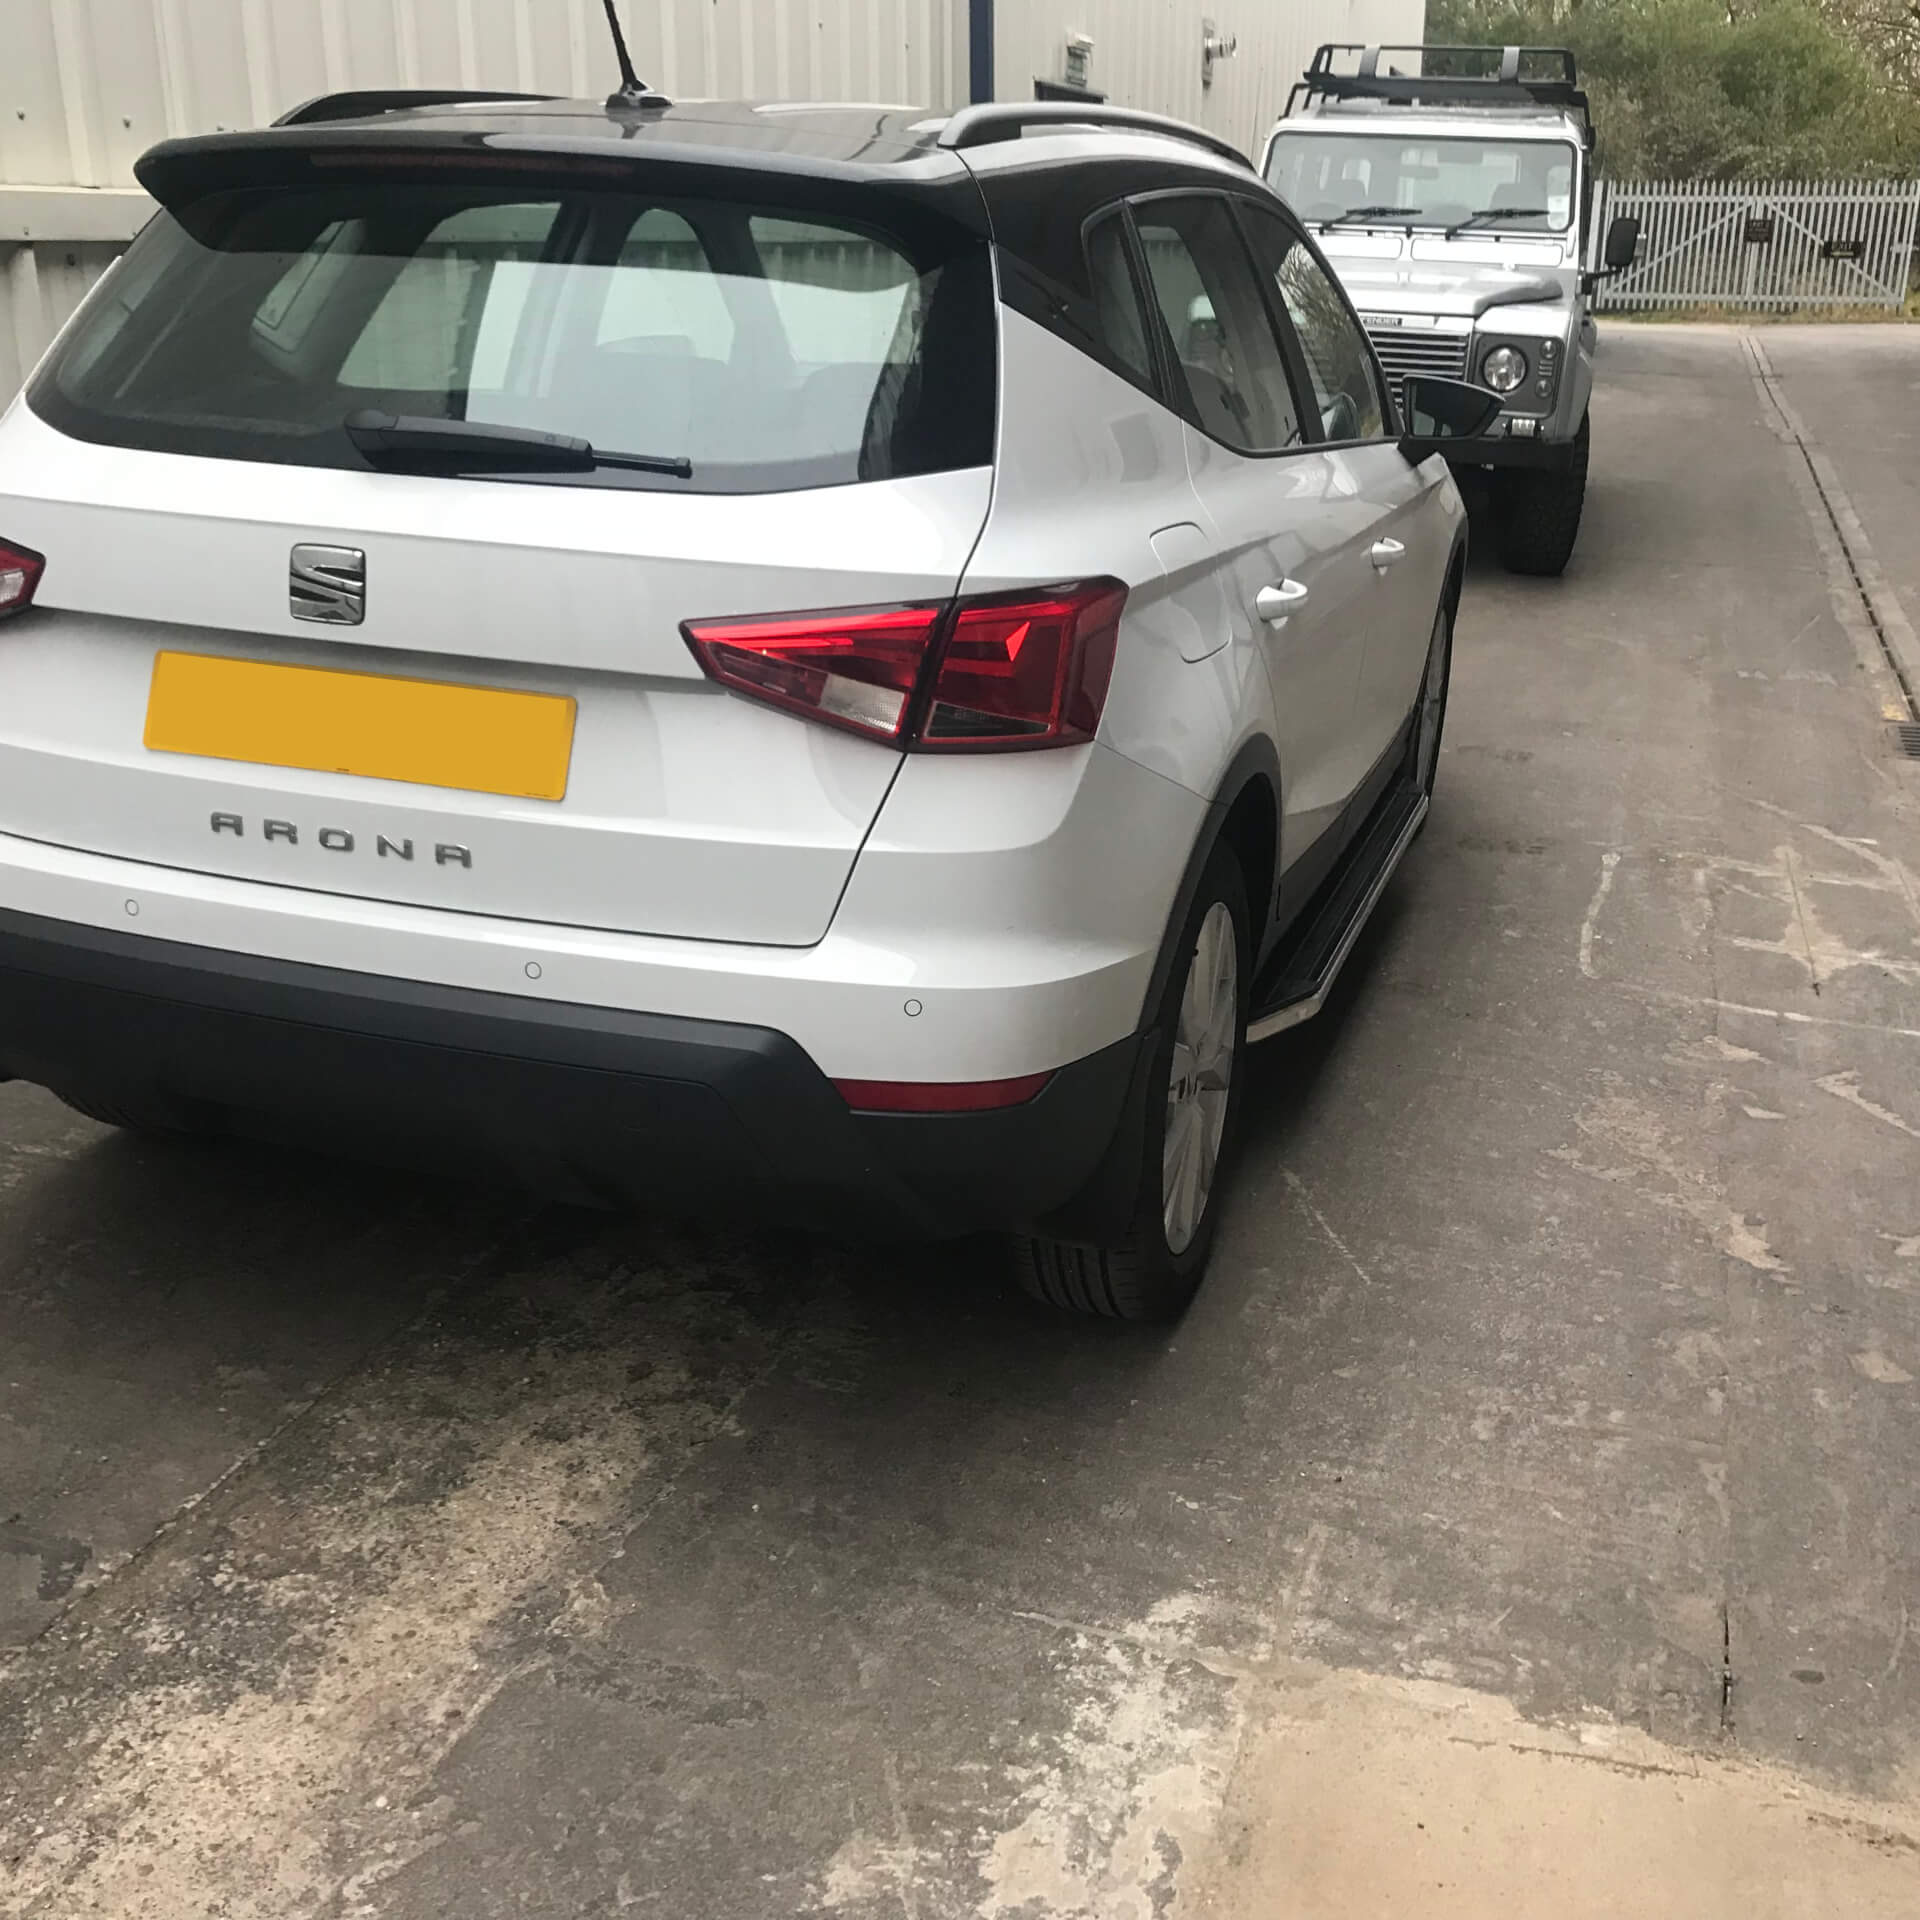 Direct4x4 accessories for Seat Arona vehicles with a photo of a white Seat Arona fitted with Raptor style side steps parked in front of our Land Rover Defender